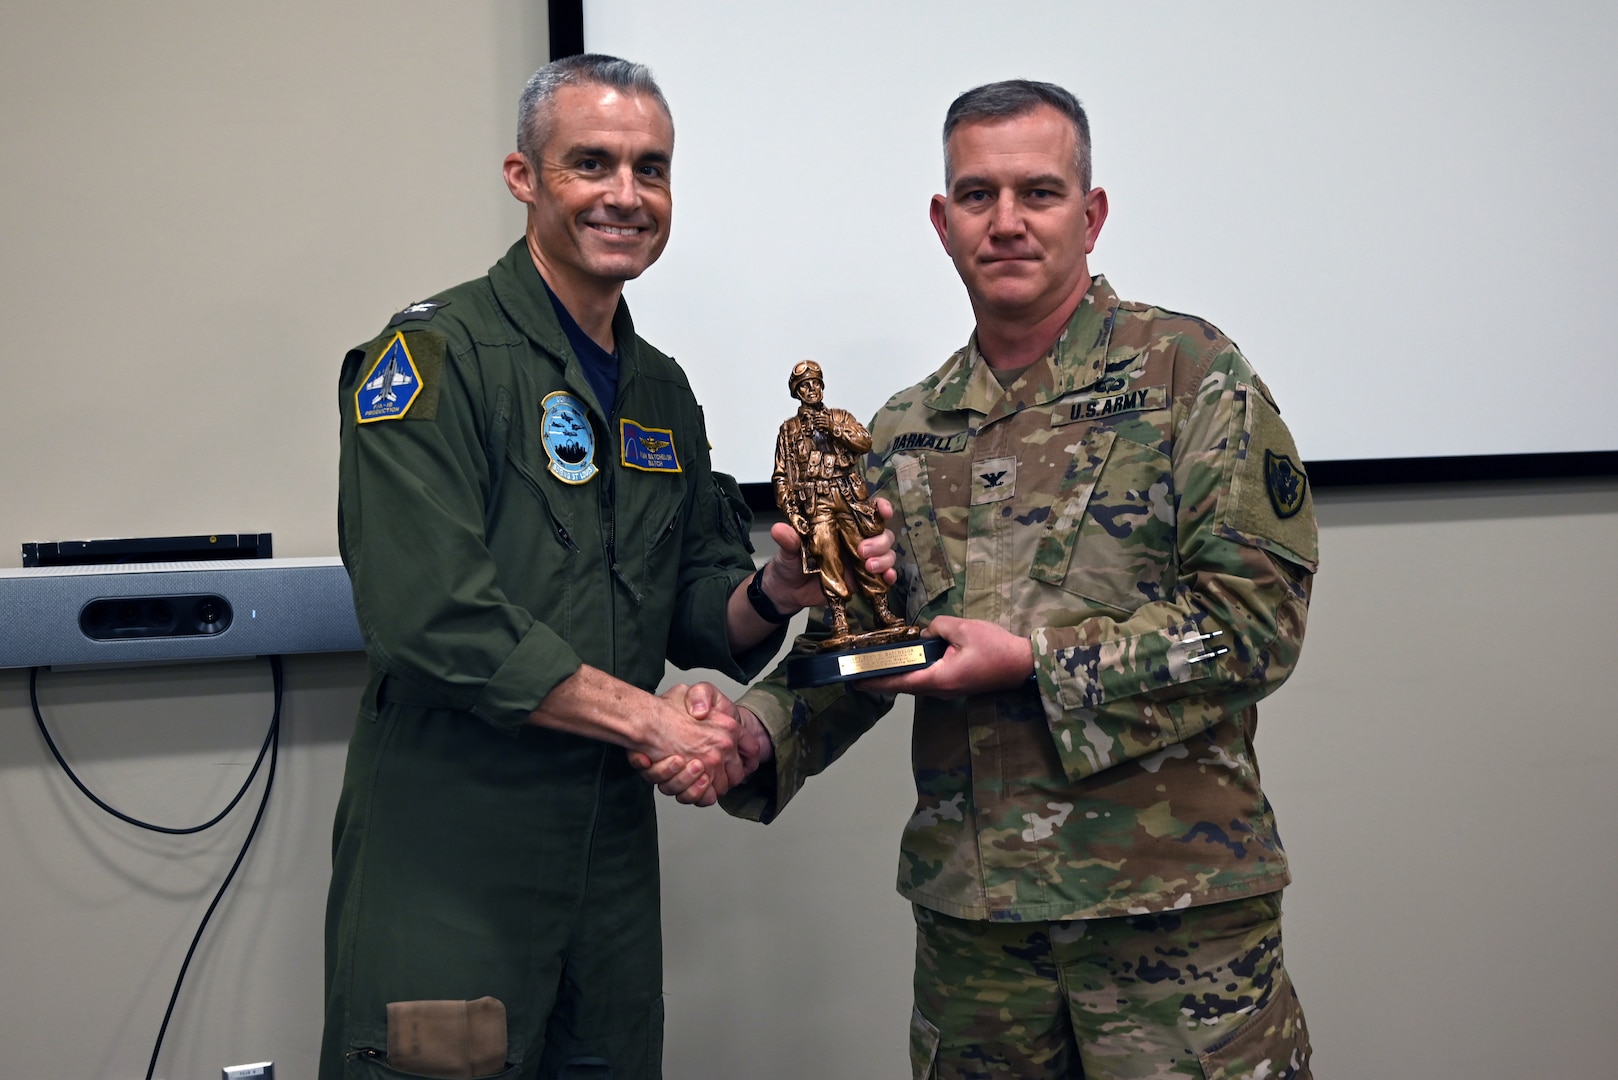 Man wearing a flight suit receives a statue from a man wearing a camouflage uniform